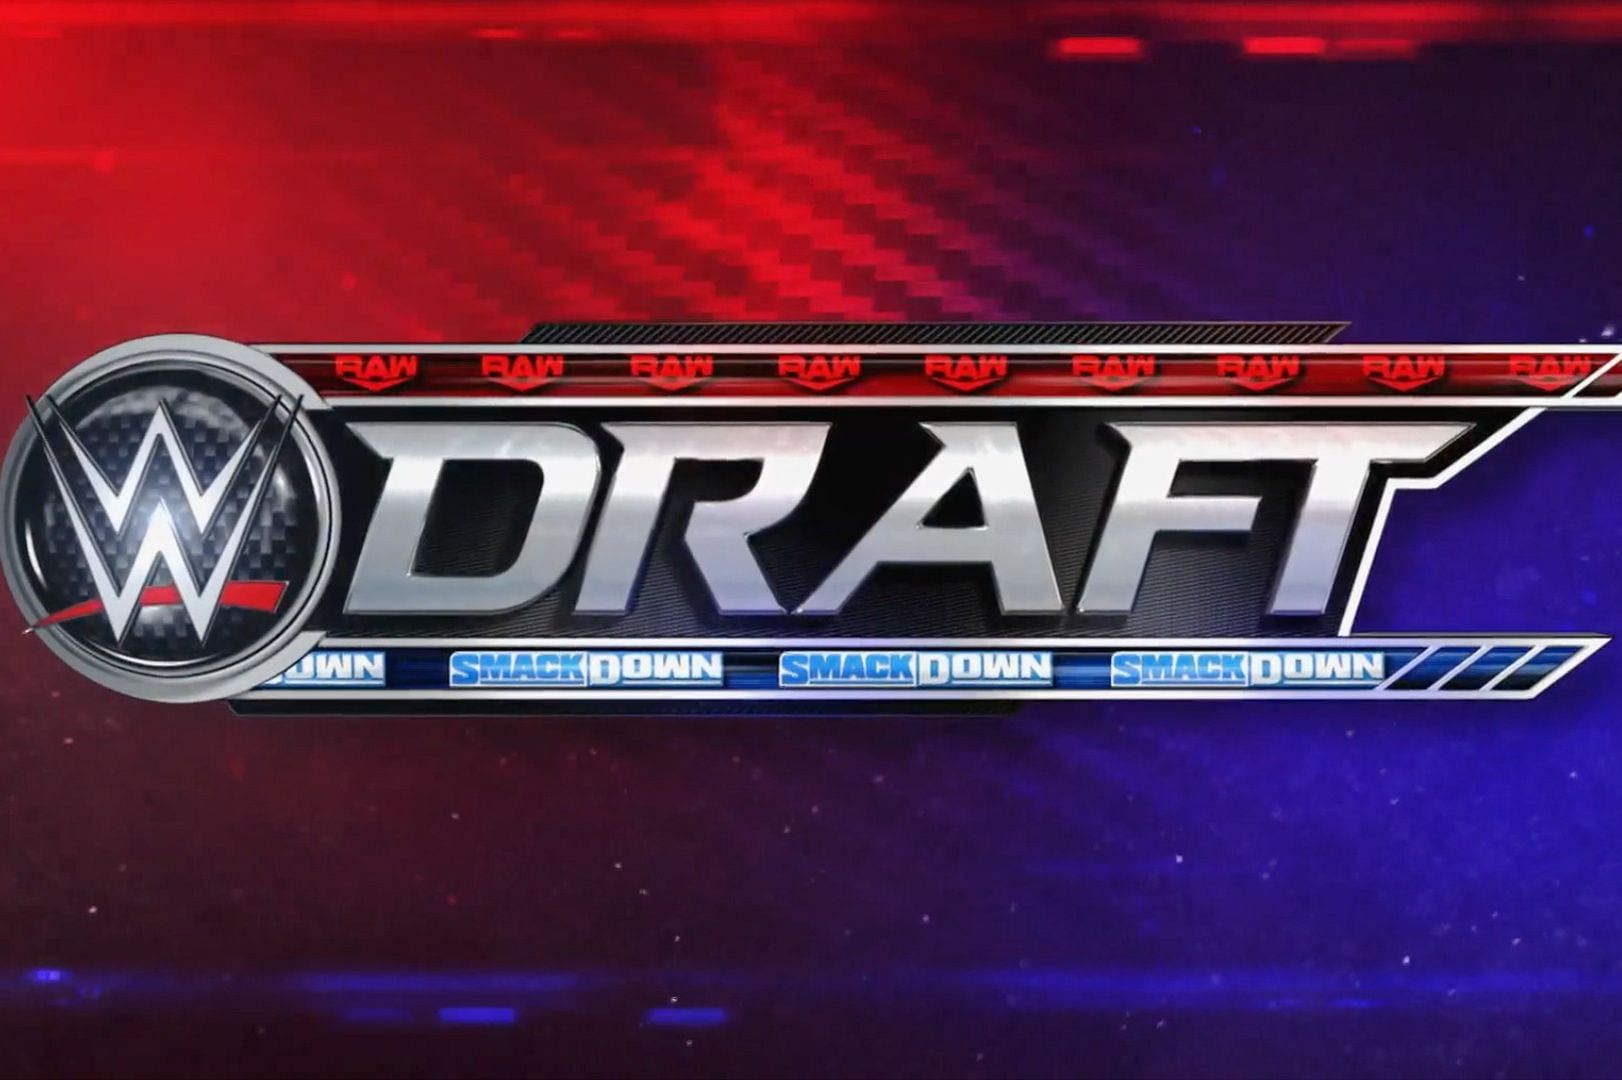 The WWE Draft will likely take place in September or October